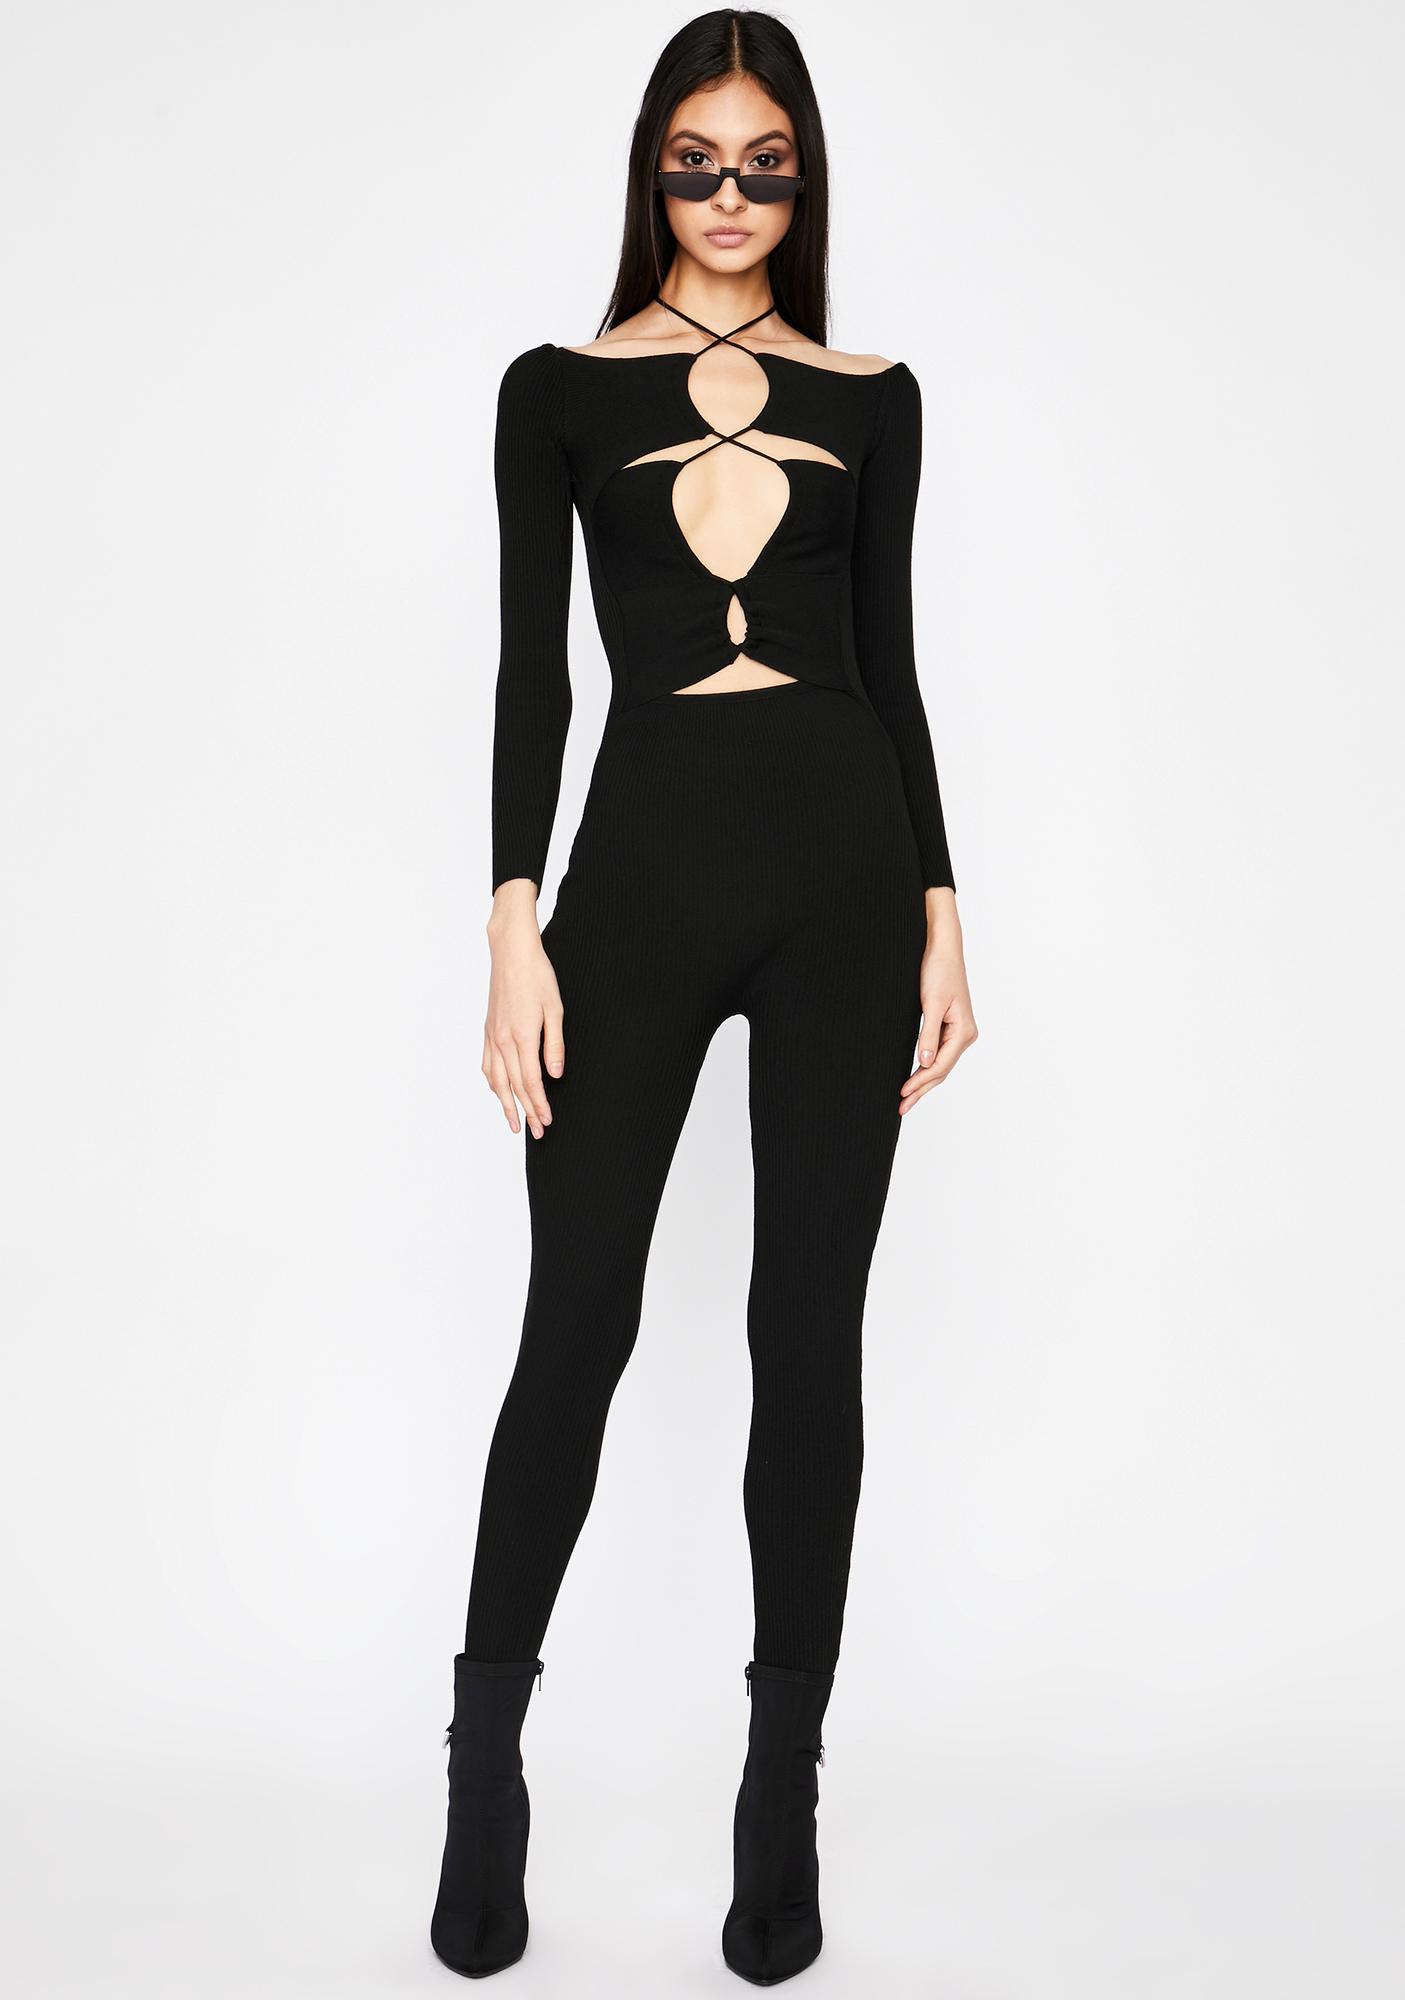 Long Sleeve Cut Out Lace Up Catsuit Black | Dolls Kill